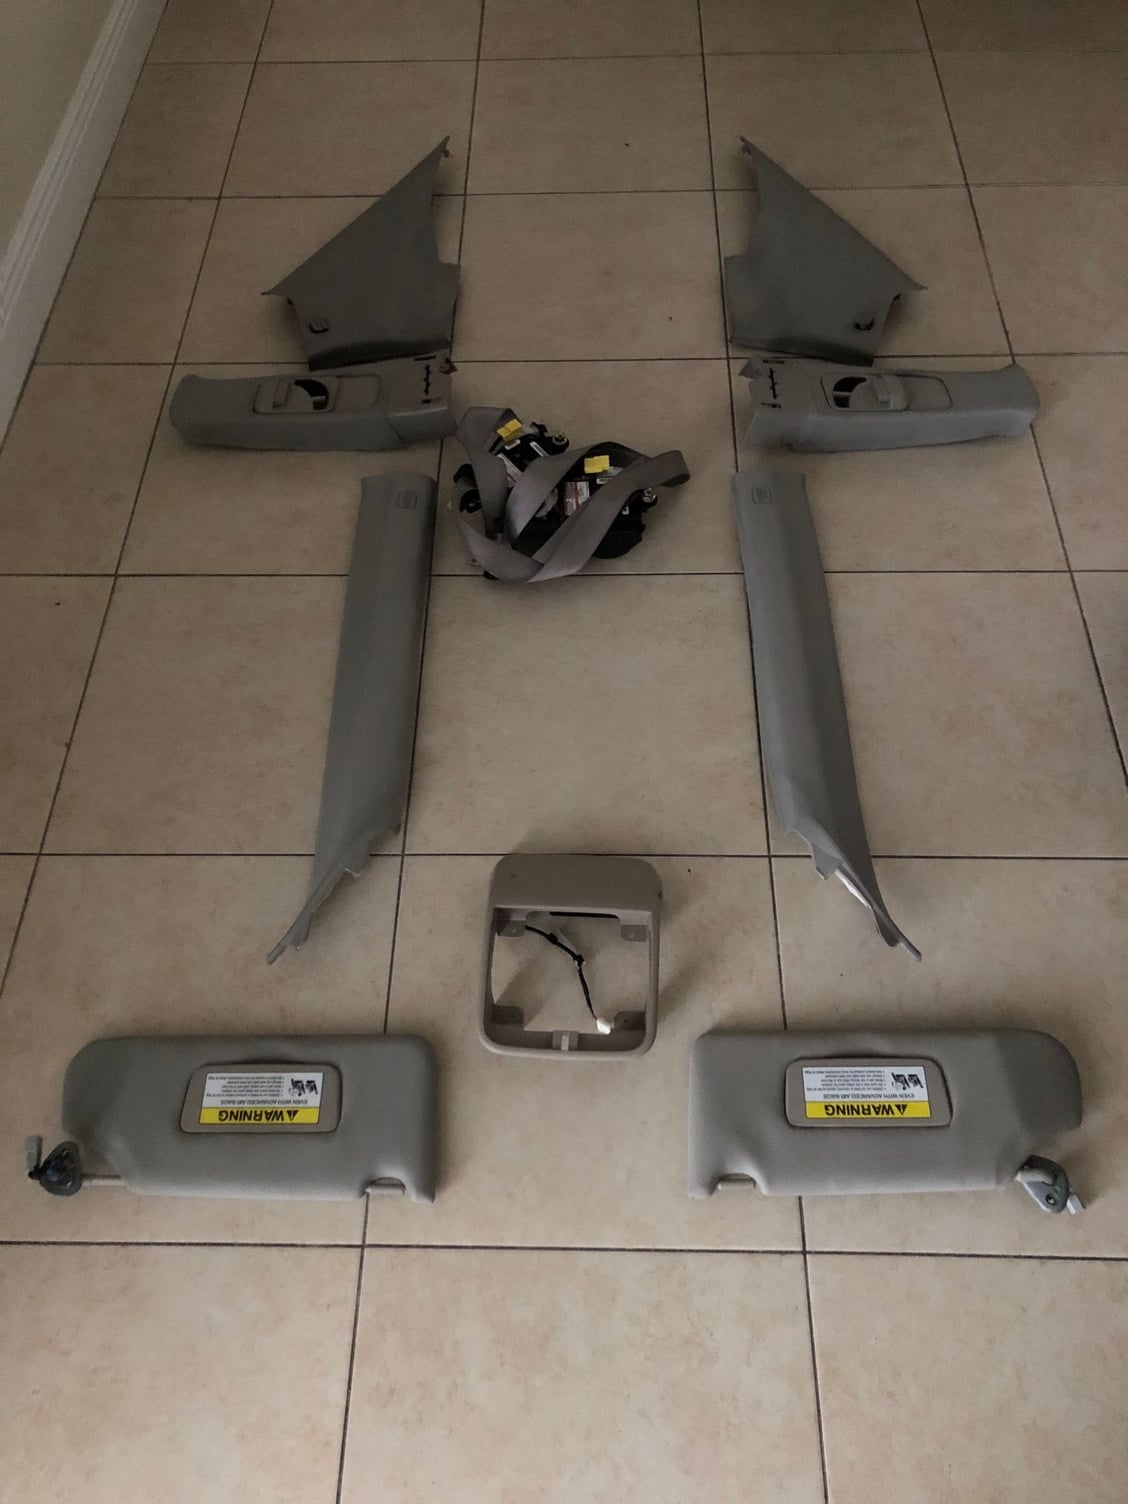 Interior/Upholstery - FS: Gray/Taupe Complete Interior Trim - Plastic Seat Covers - Seatbelts - Used - 2004 to 2008 Acura TL - Miami, FL 33126, United States